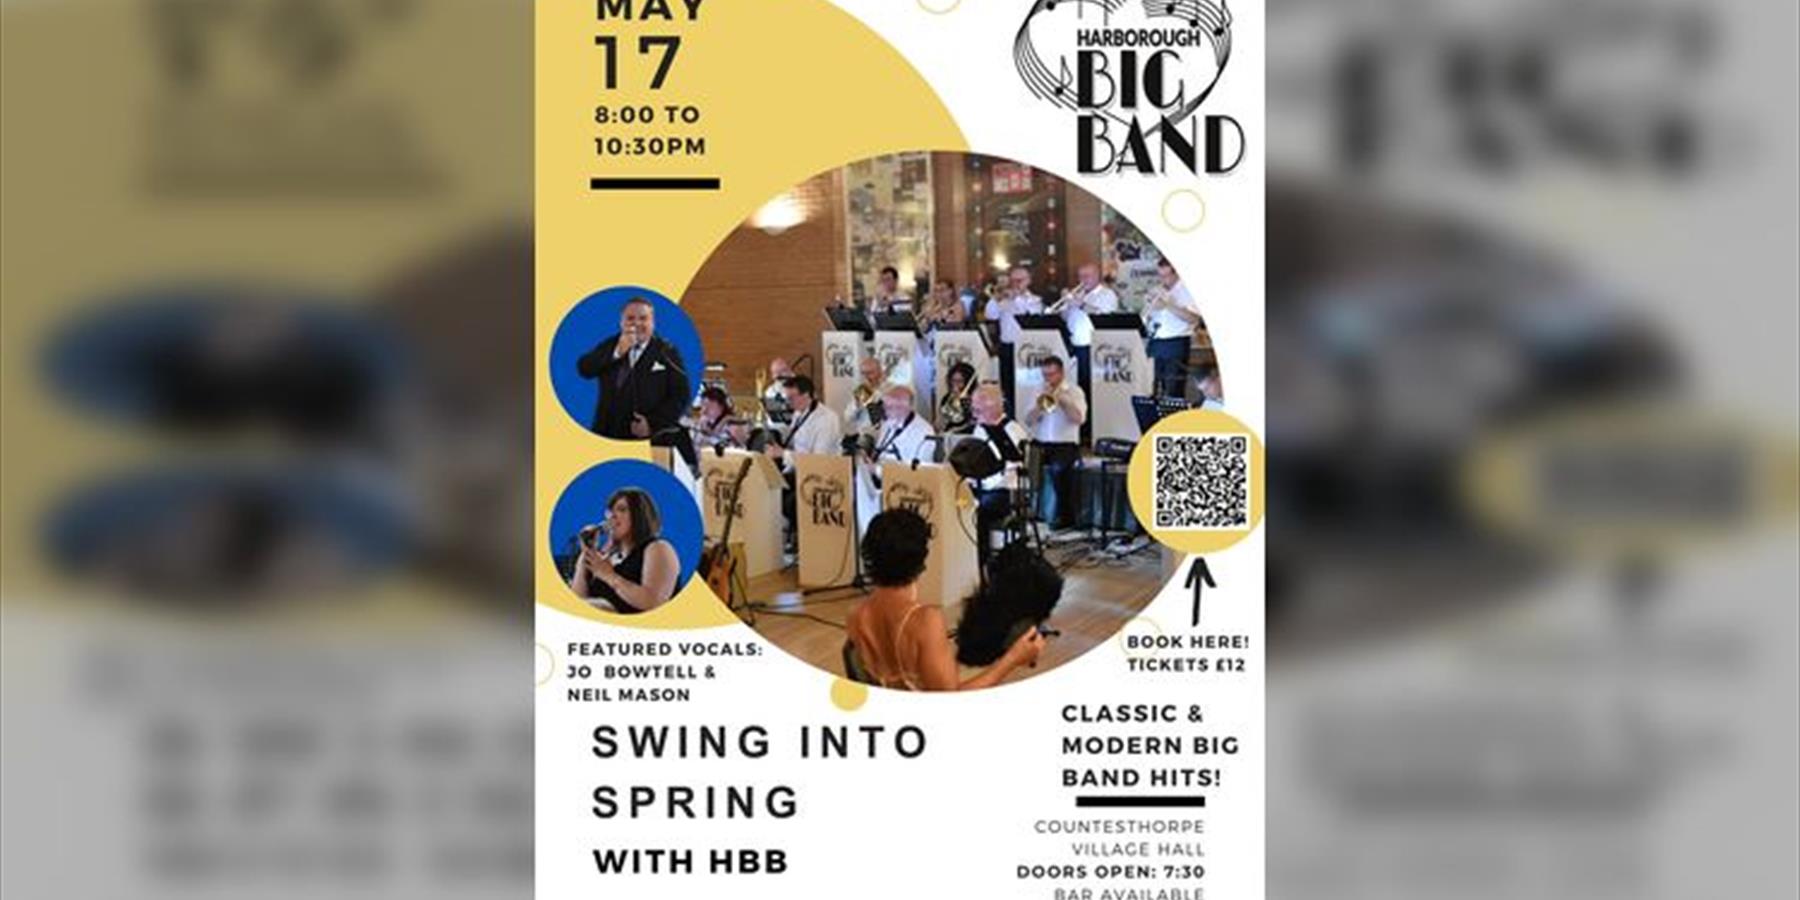 Harborough Big Band Music and Dance Evening